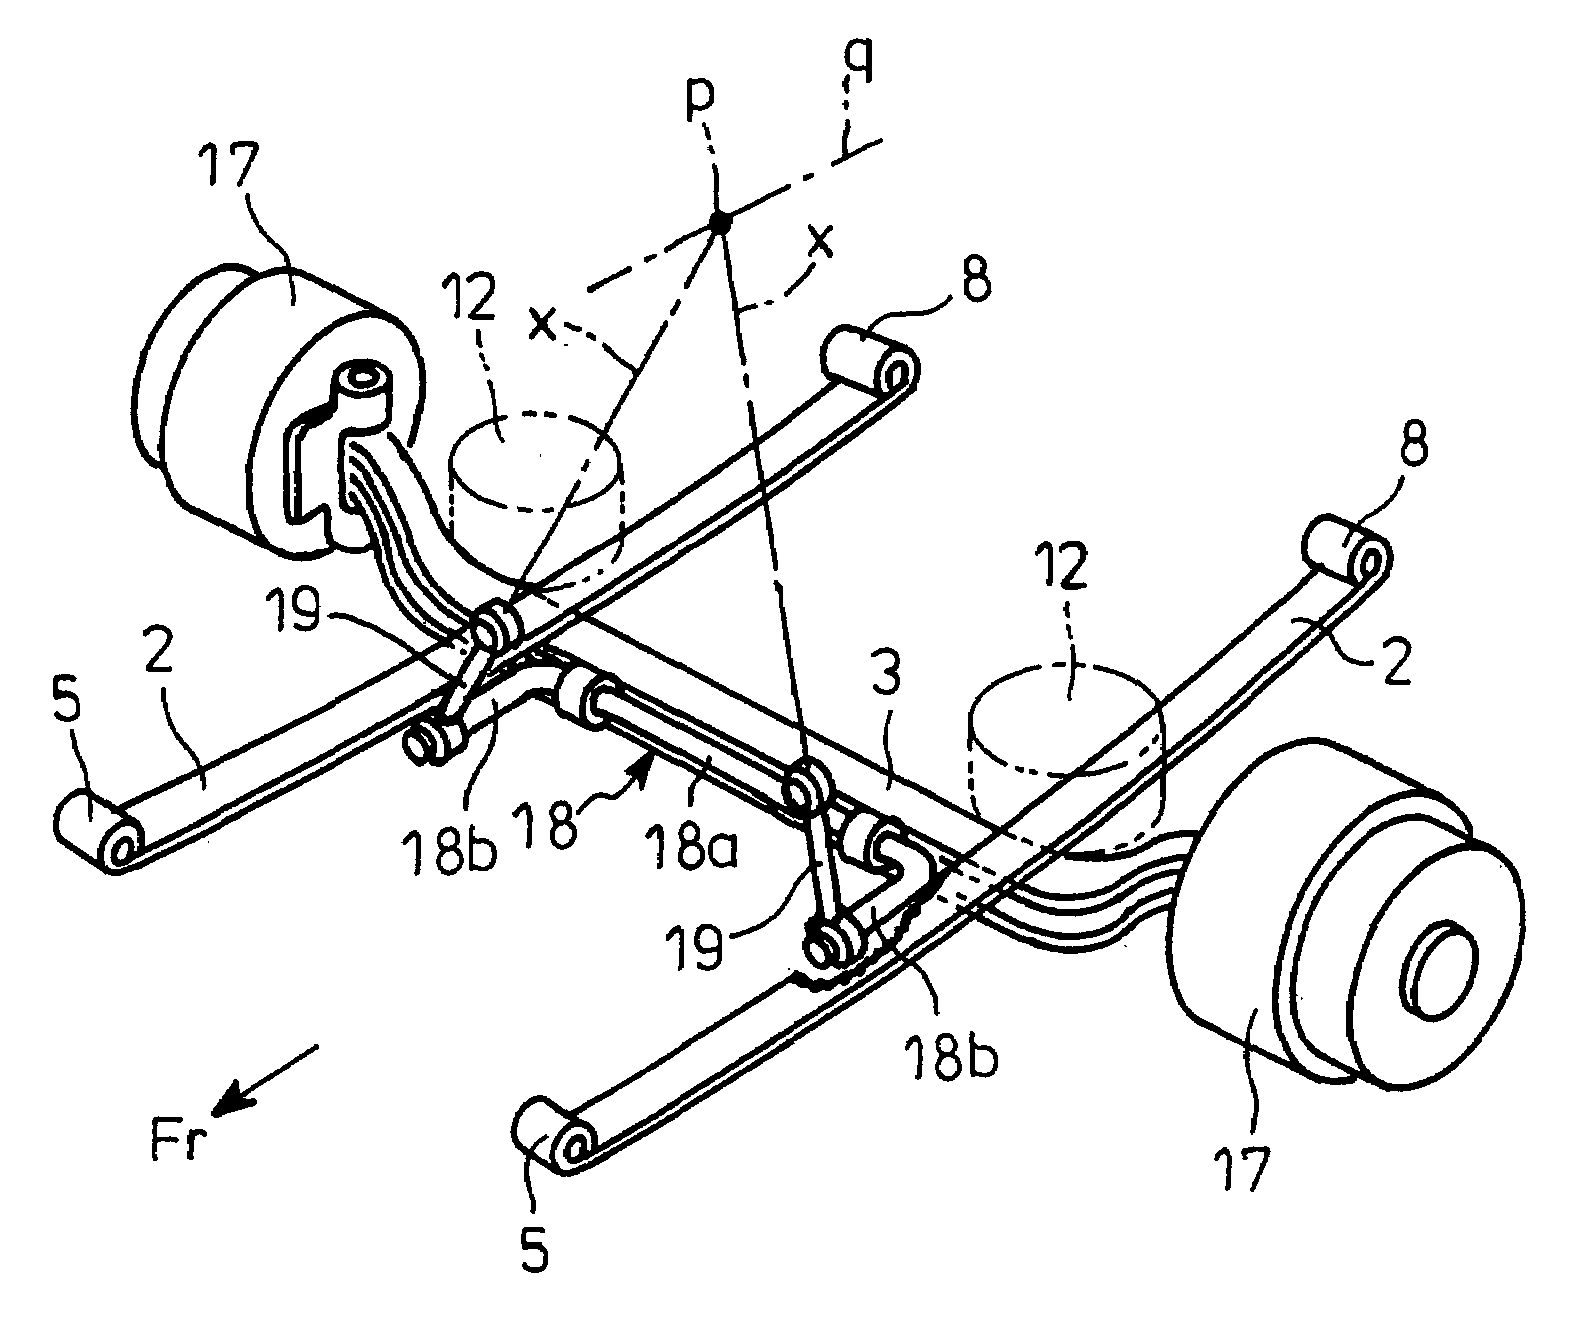 Stabilizer and air leaf suspension using the same